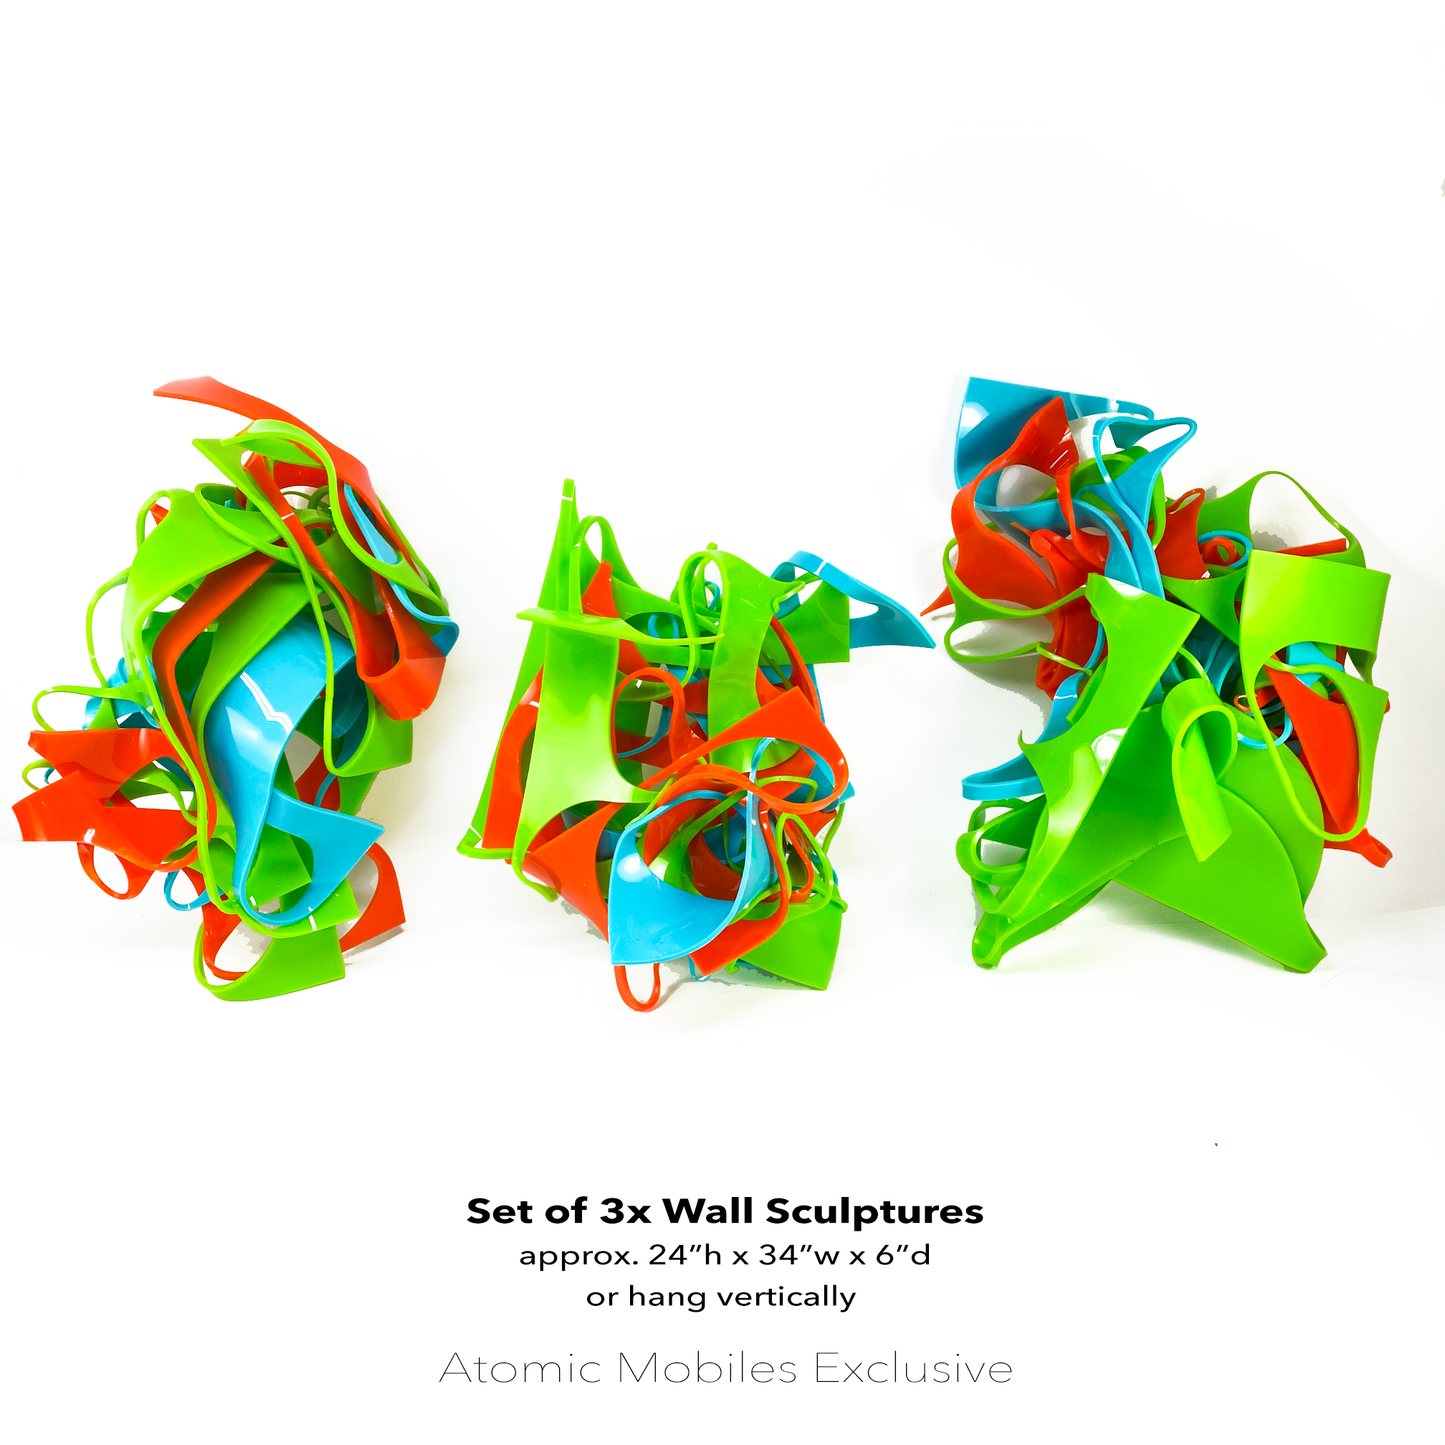 Set of 3 Colorful 3D wall art hanging in a horizontal row in Palm Springs Colors of Lime Green, Aqua Blue, and Orange - recycled acrylic abstract 3D wall art by AtomicMobiles.com